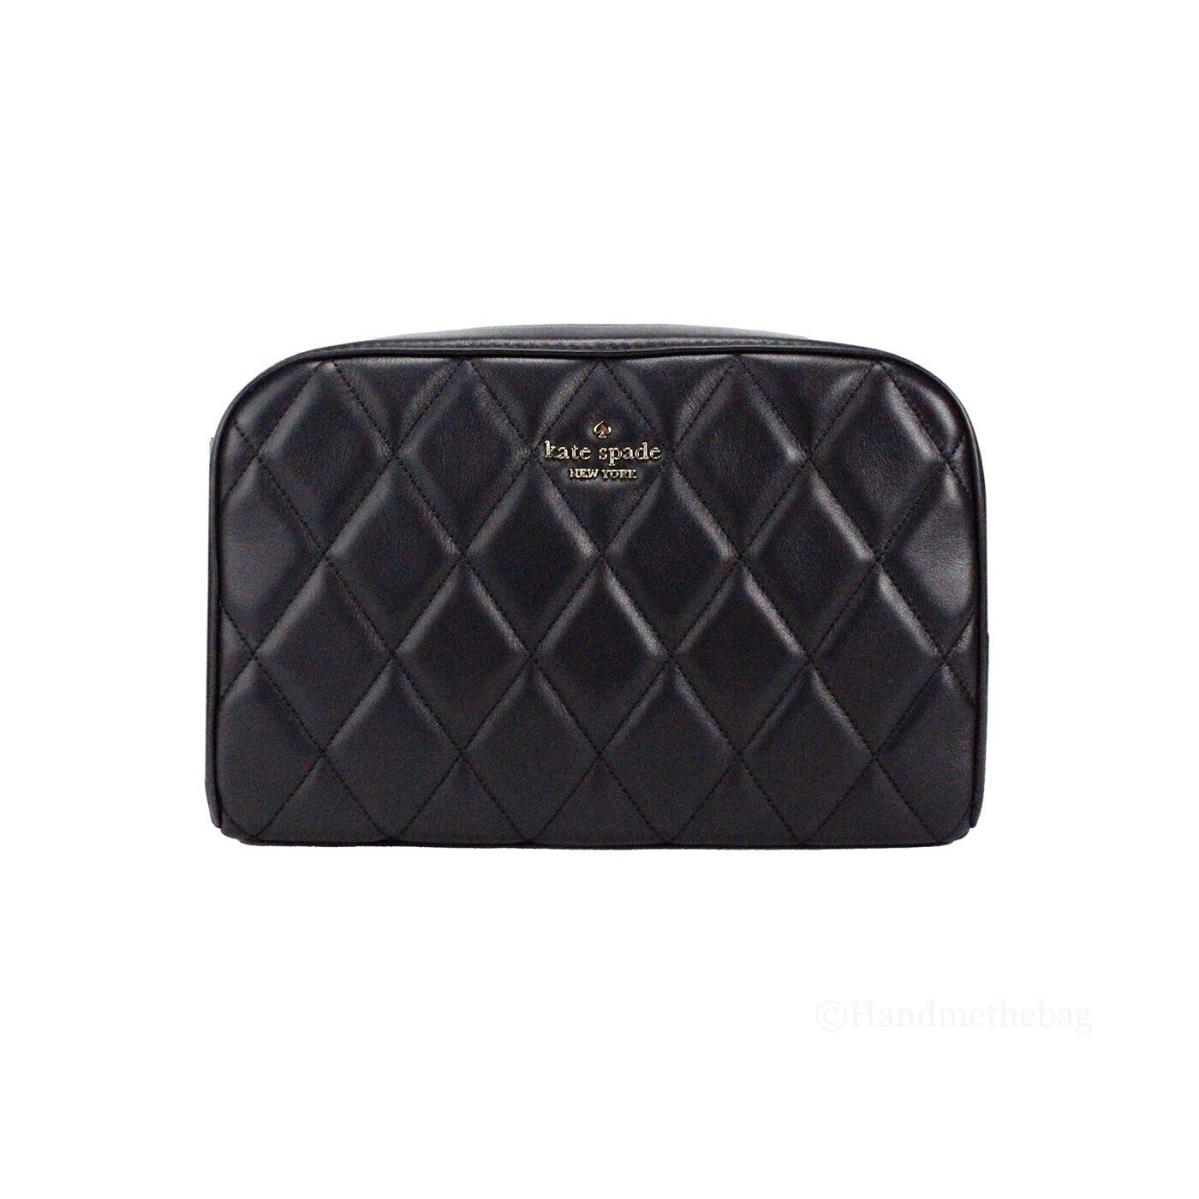 Kate Spade Carey Mini Black Quilted Smooth Leather Camera Crossbody Bag